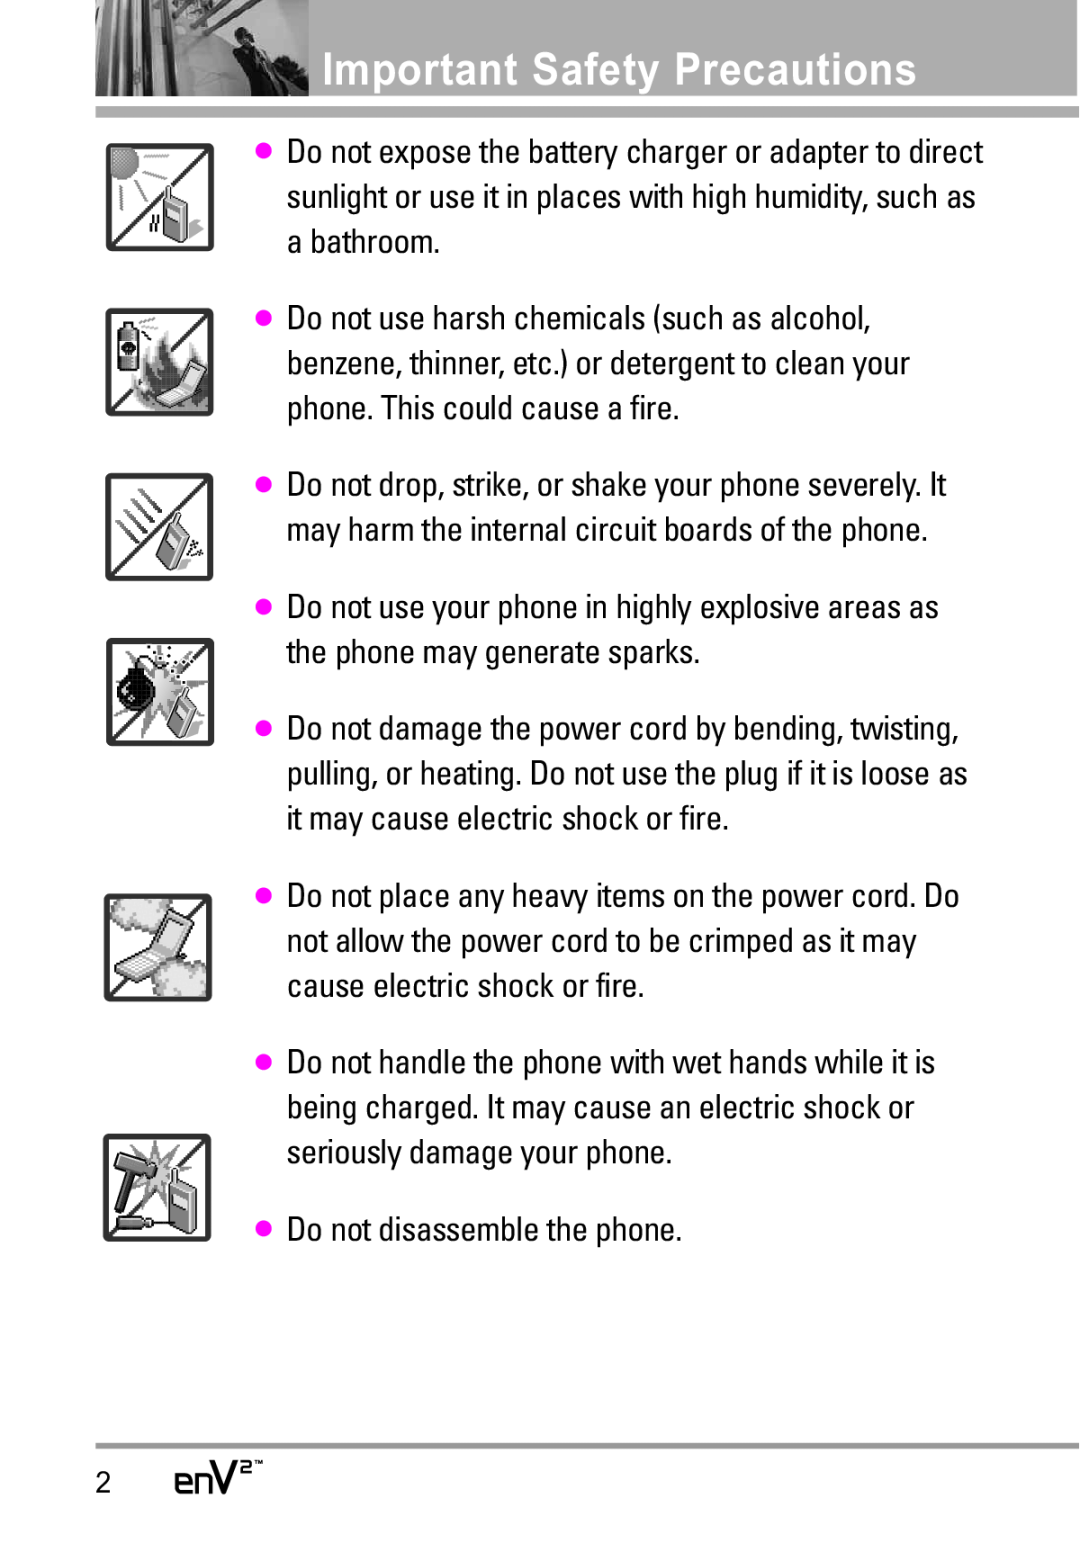 LG Electronics EnV2 manual Important Safety Precautions, Do not disassemble the phone 